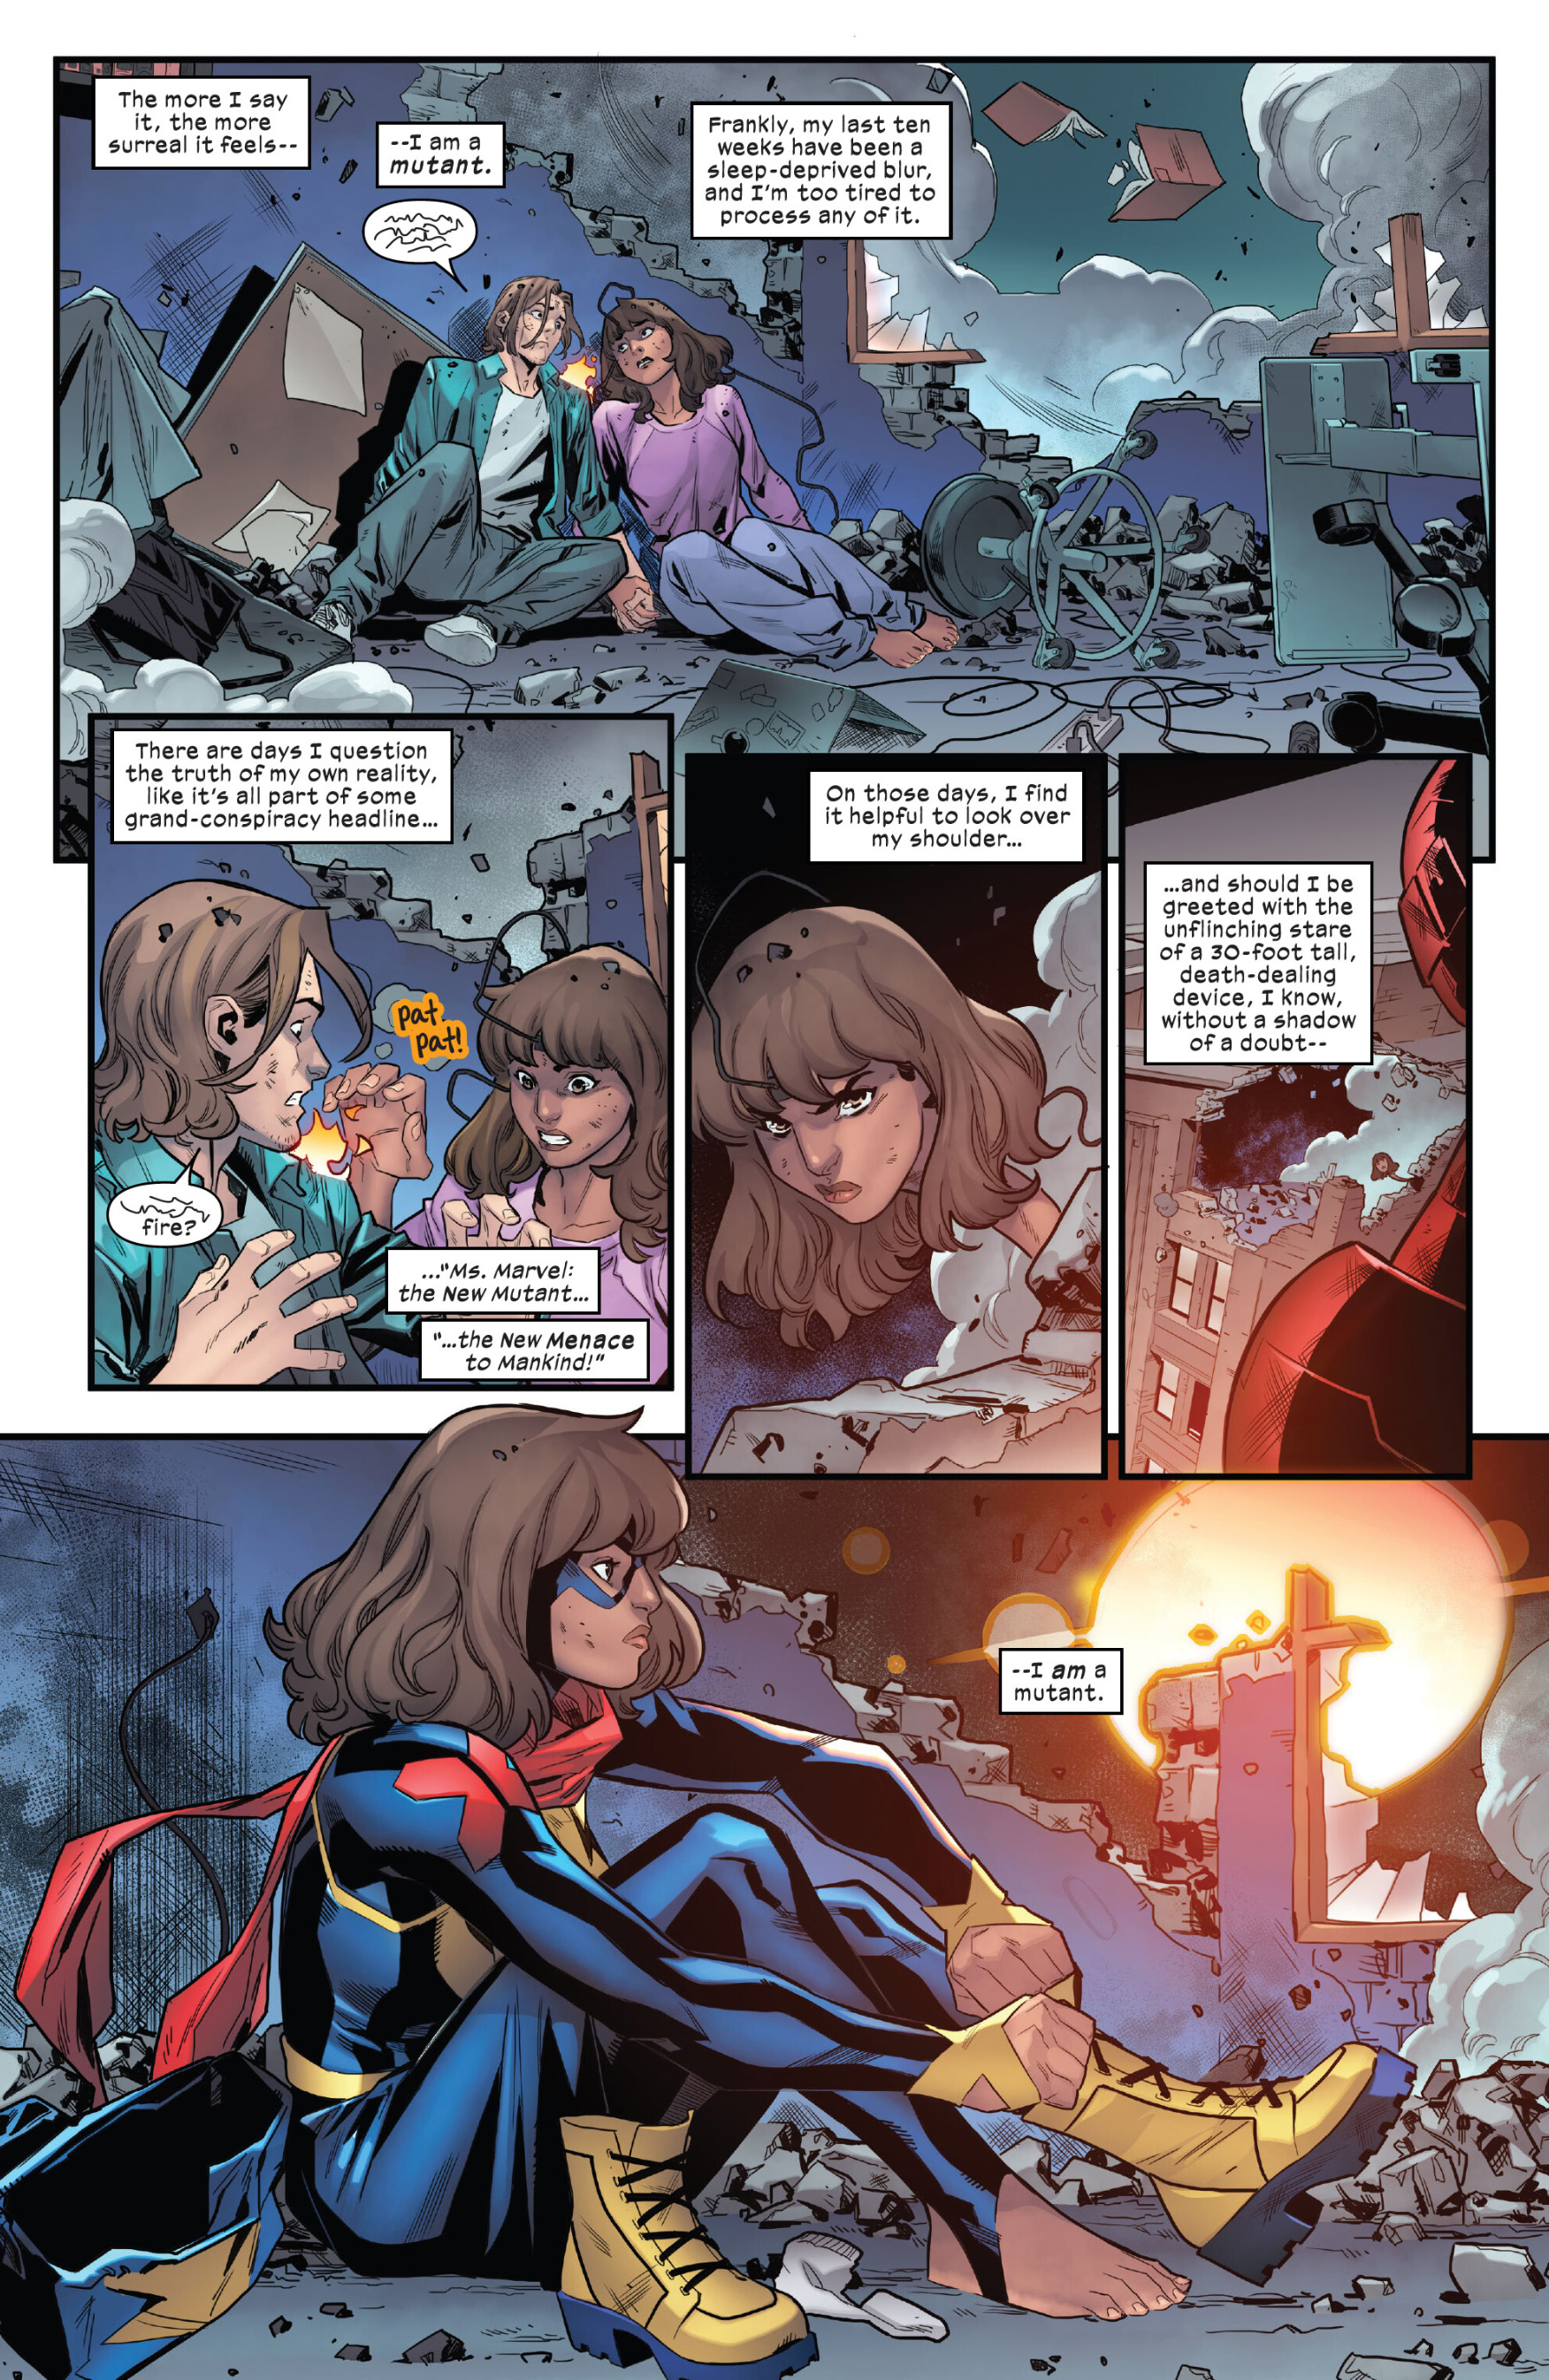 Ms. Marvel: The New Mutant (2023-): Chapter 4 - Page 2